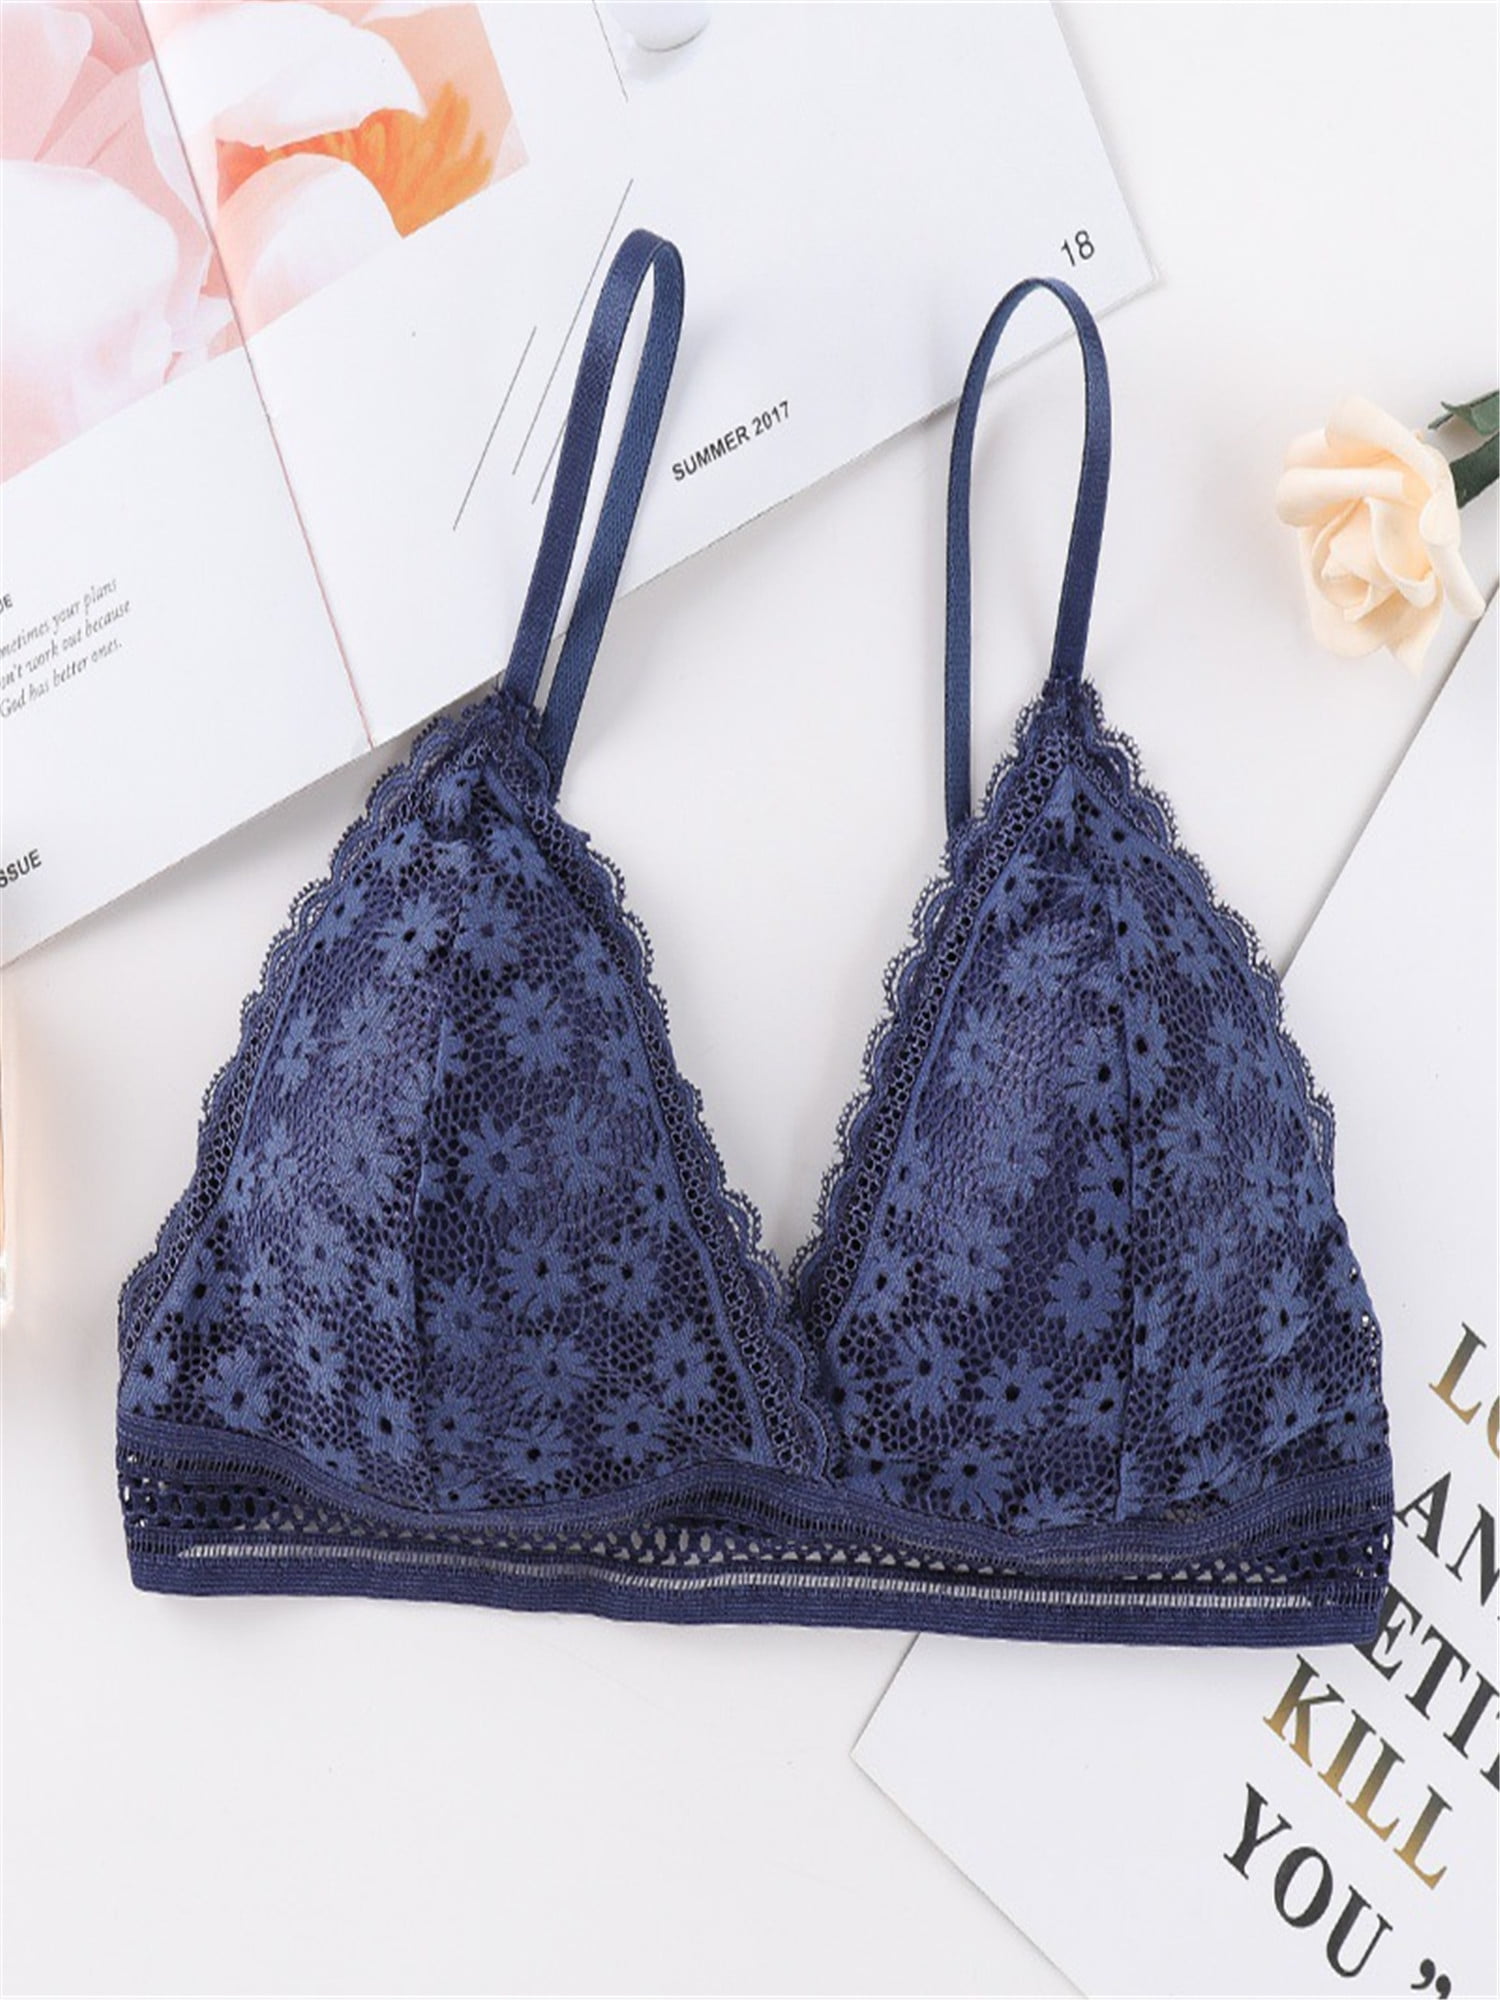 Fysho Women Floral Lace Bralette Padded Breathable Sexy Lace Bra